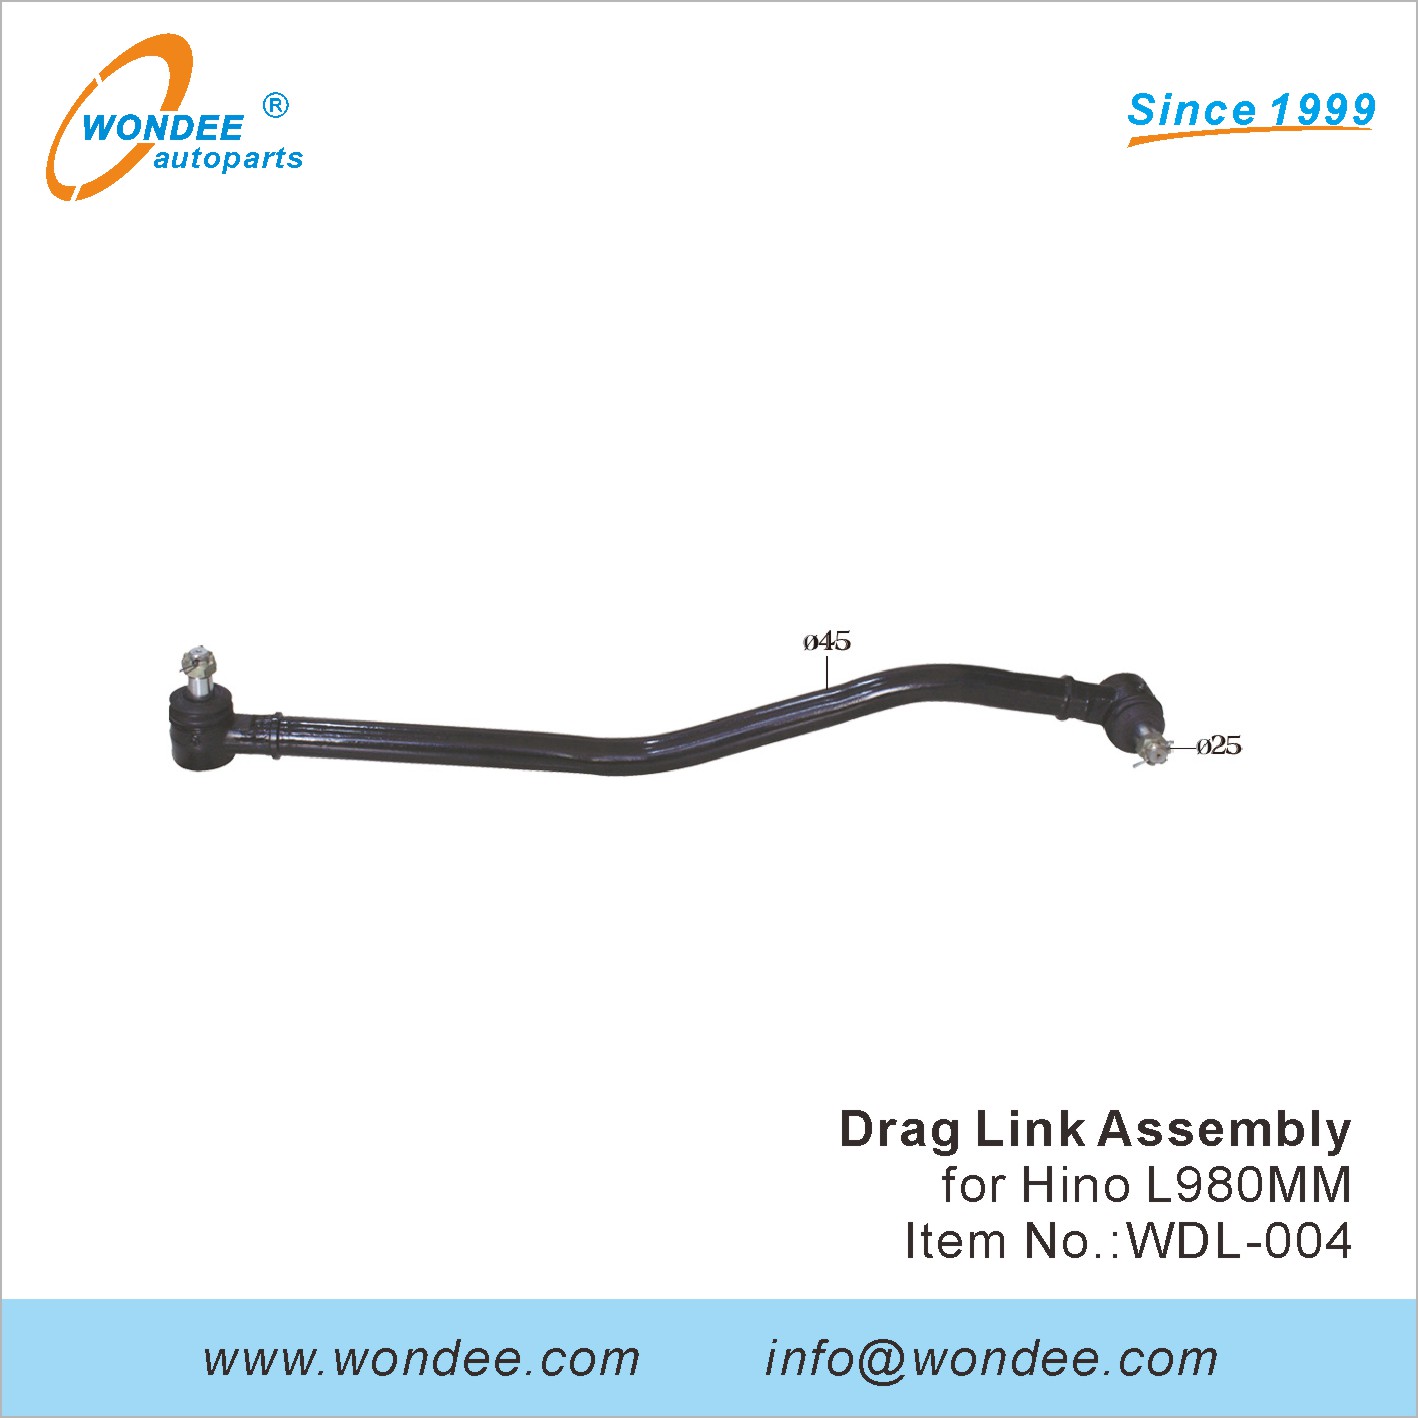 WONDEE drag link assembly (4)